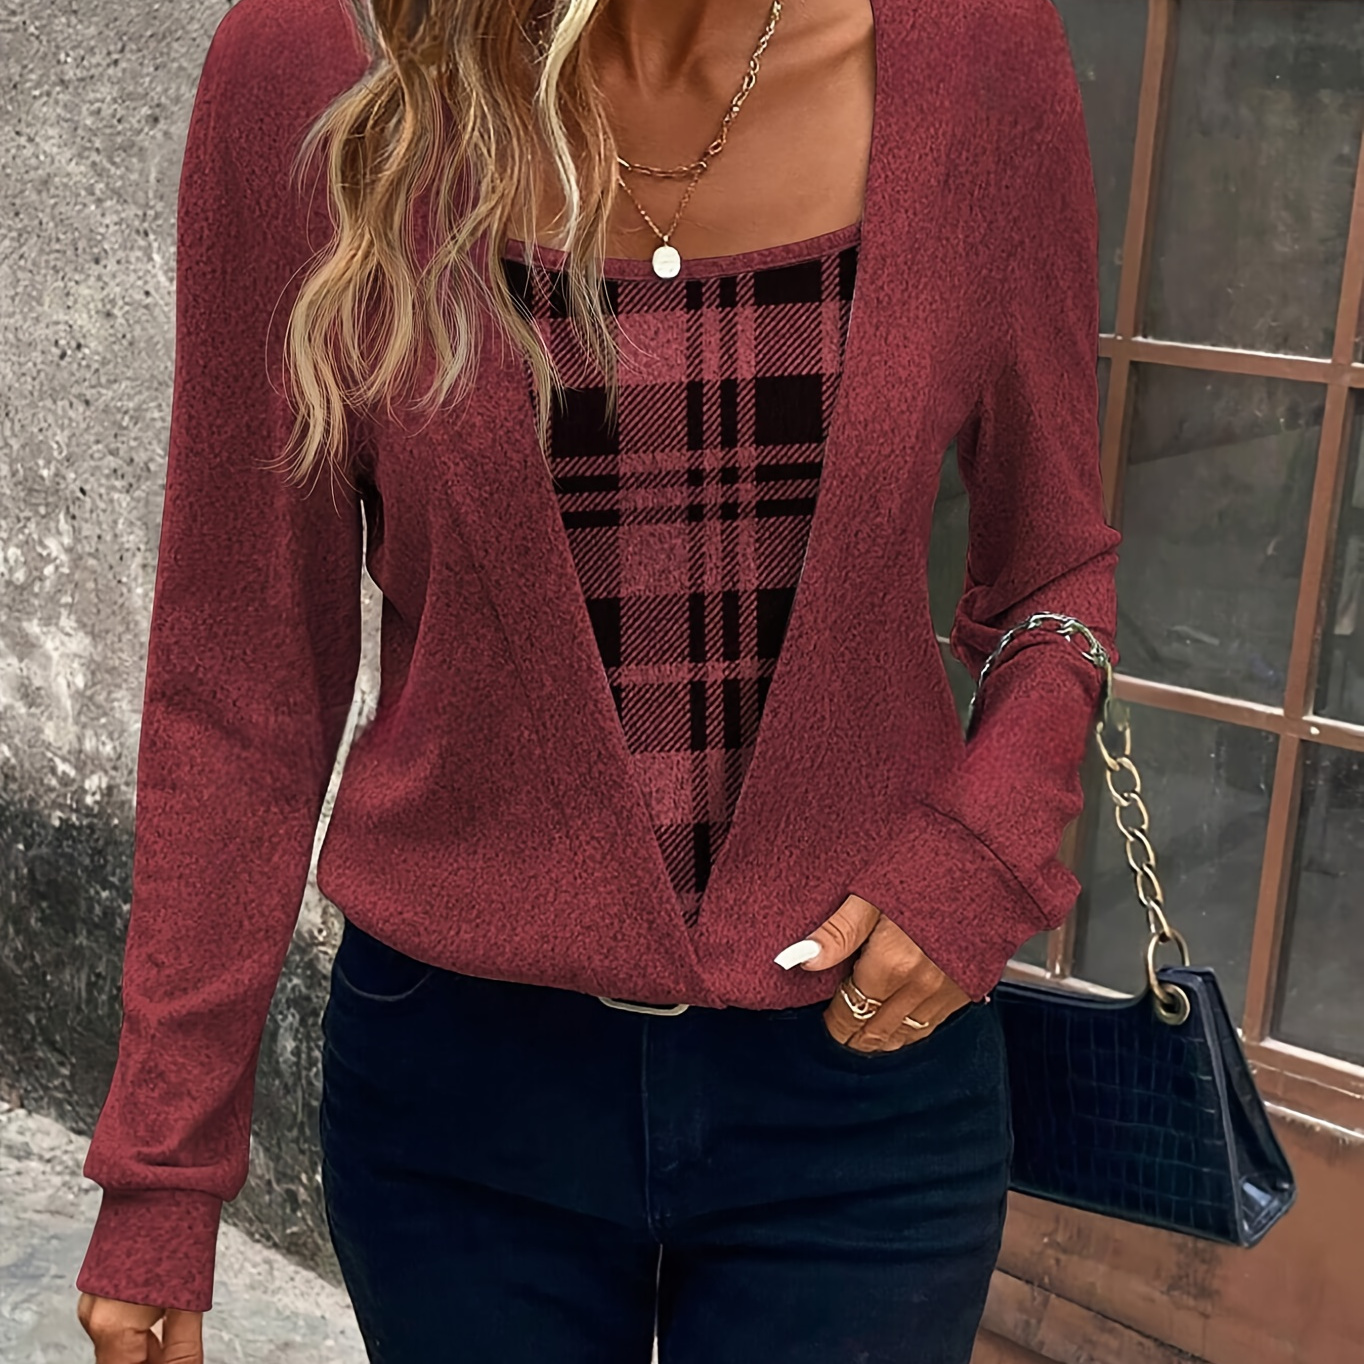 

Plaid Pattern Square Neck Splicing Top, Elegant Long Sleeve Color Block Top For Spring & Fall, Women's Clothing